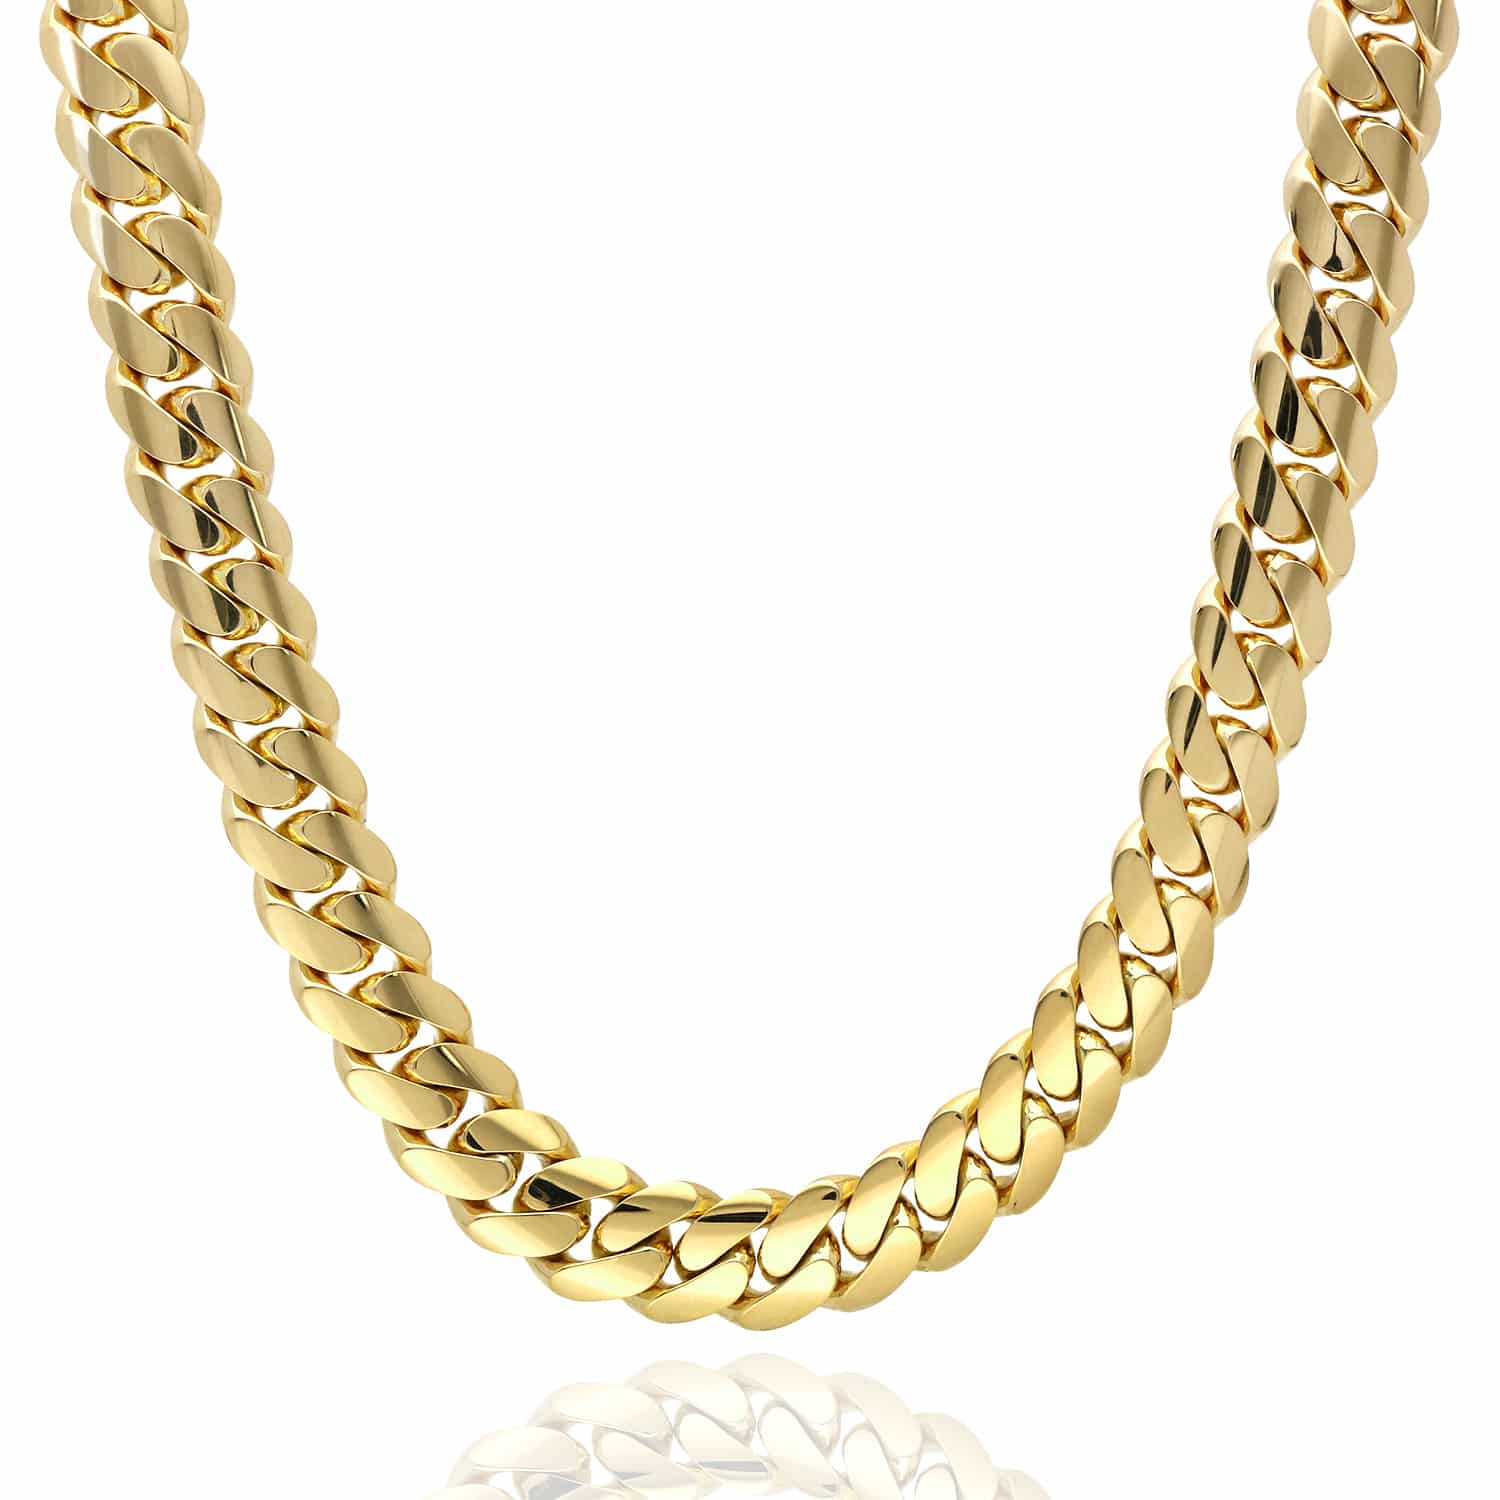 Solid 14K Yellow Gold 11mm Miami Cuban Chain Necklace 18"-28" - 18"